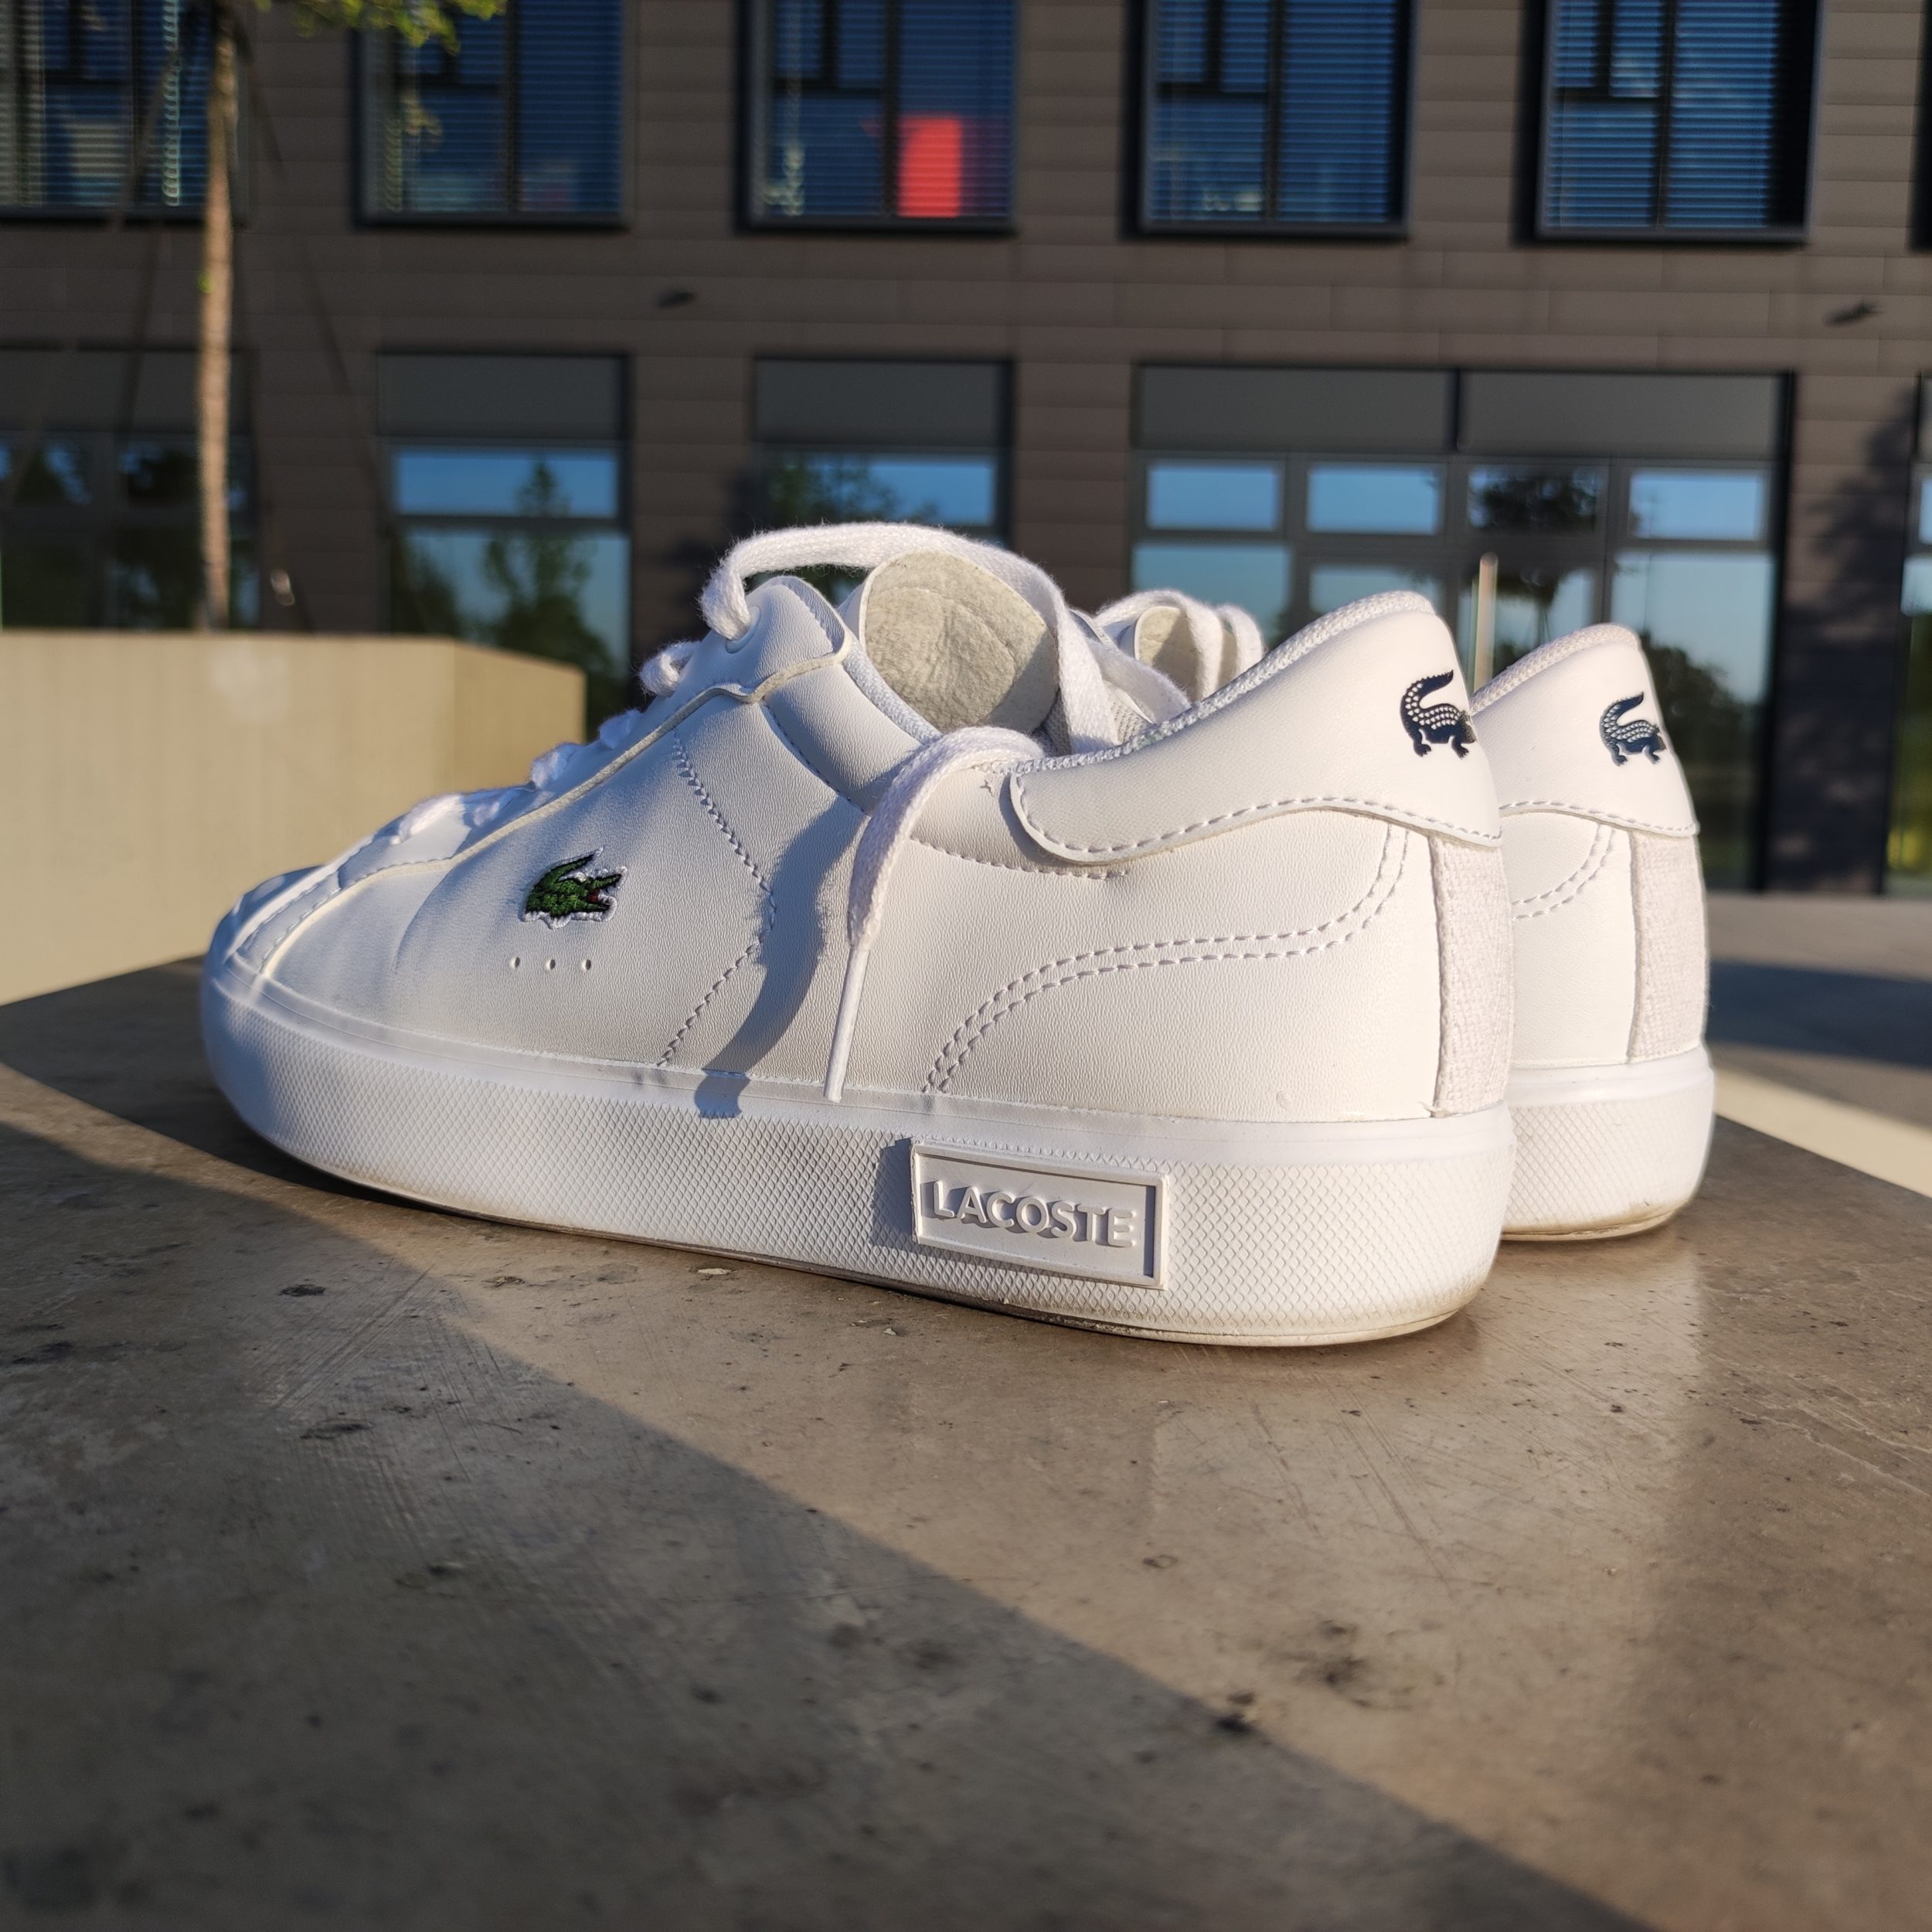 lacoste white shoes urban style